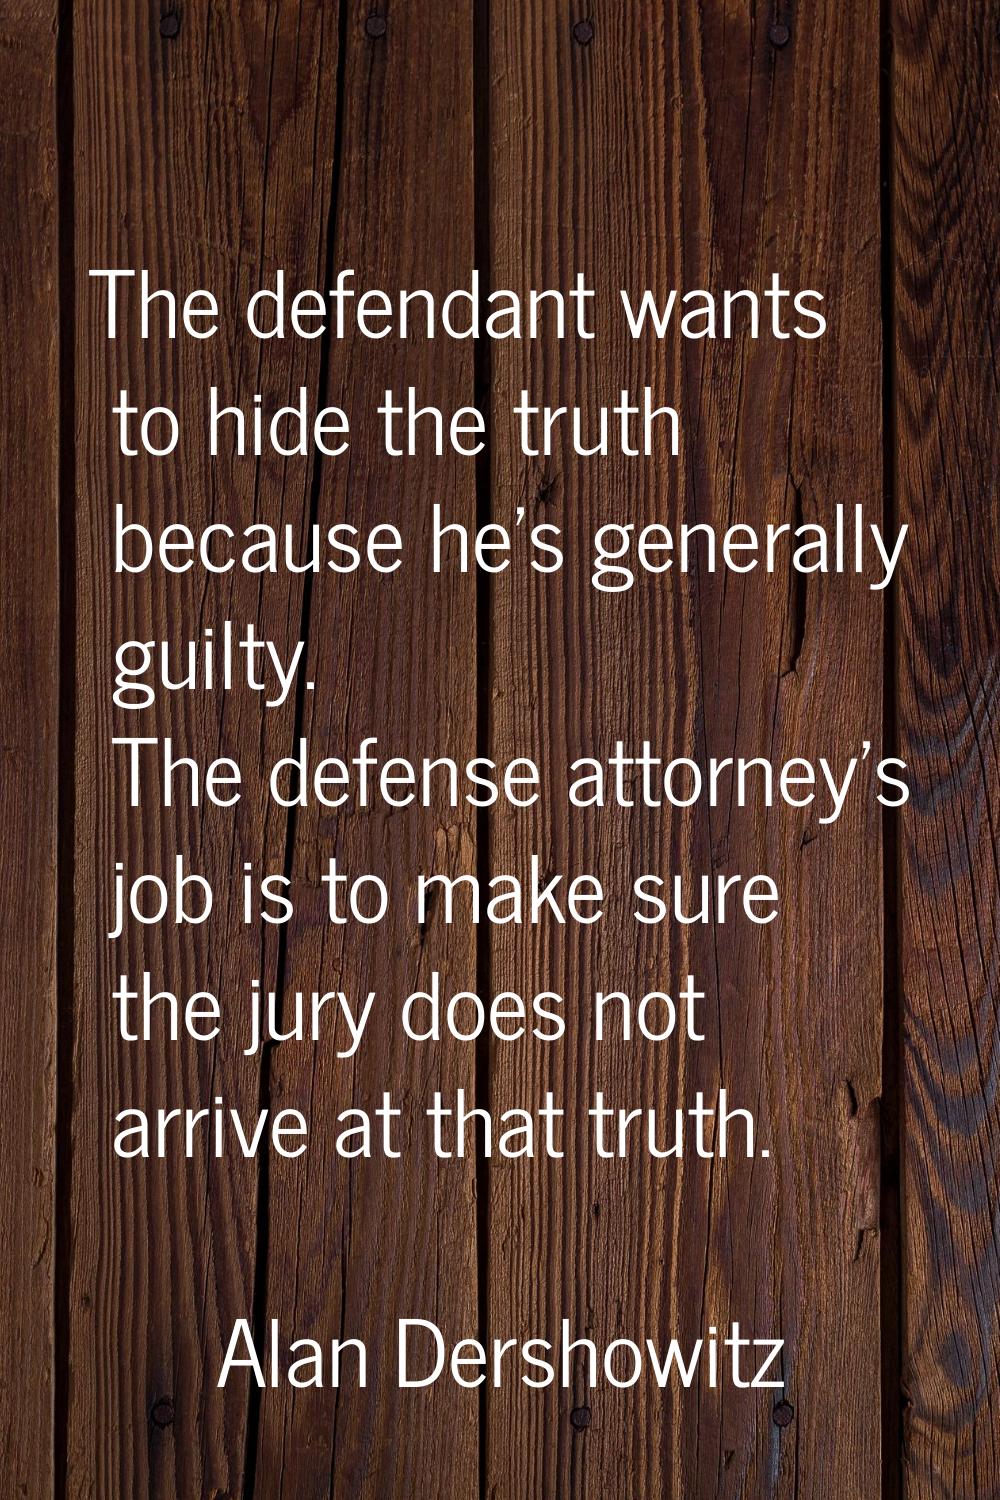 The defendant wants to hide the truth because he's generally guilty. The defense attorney's job is 